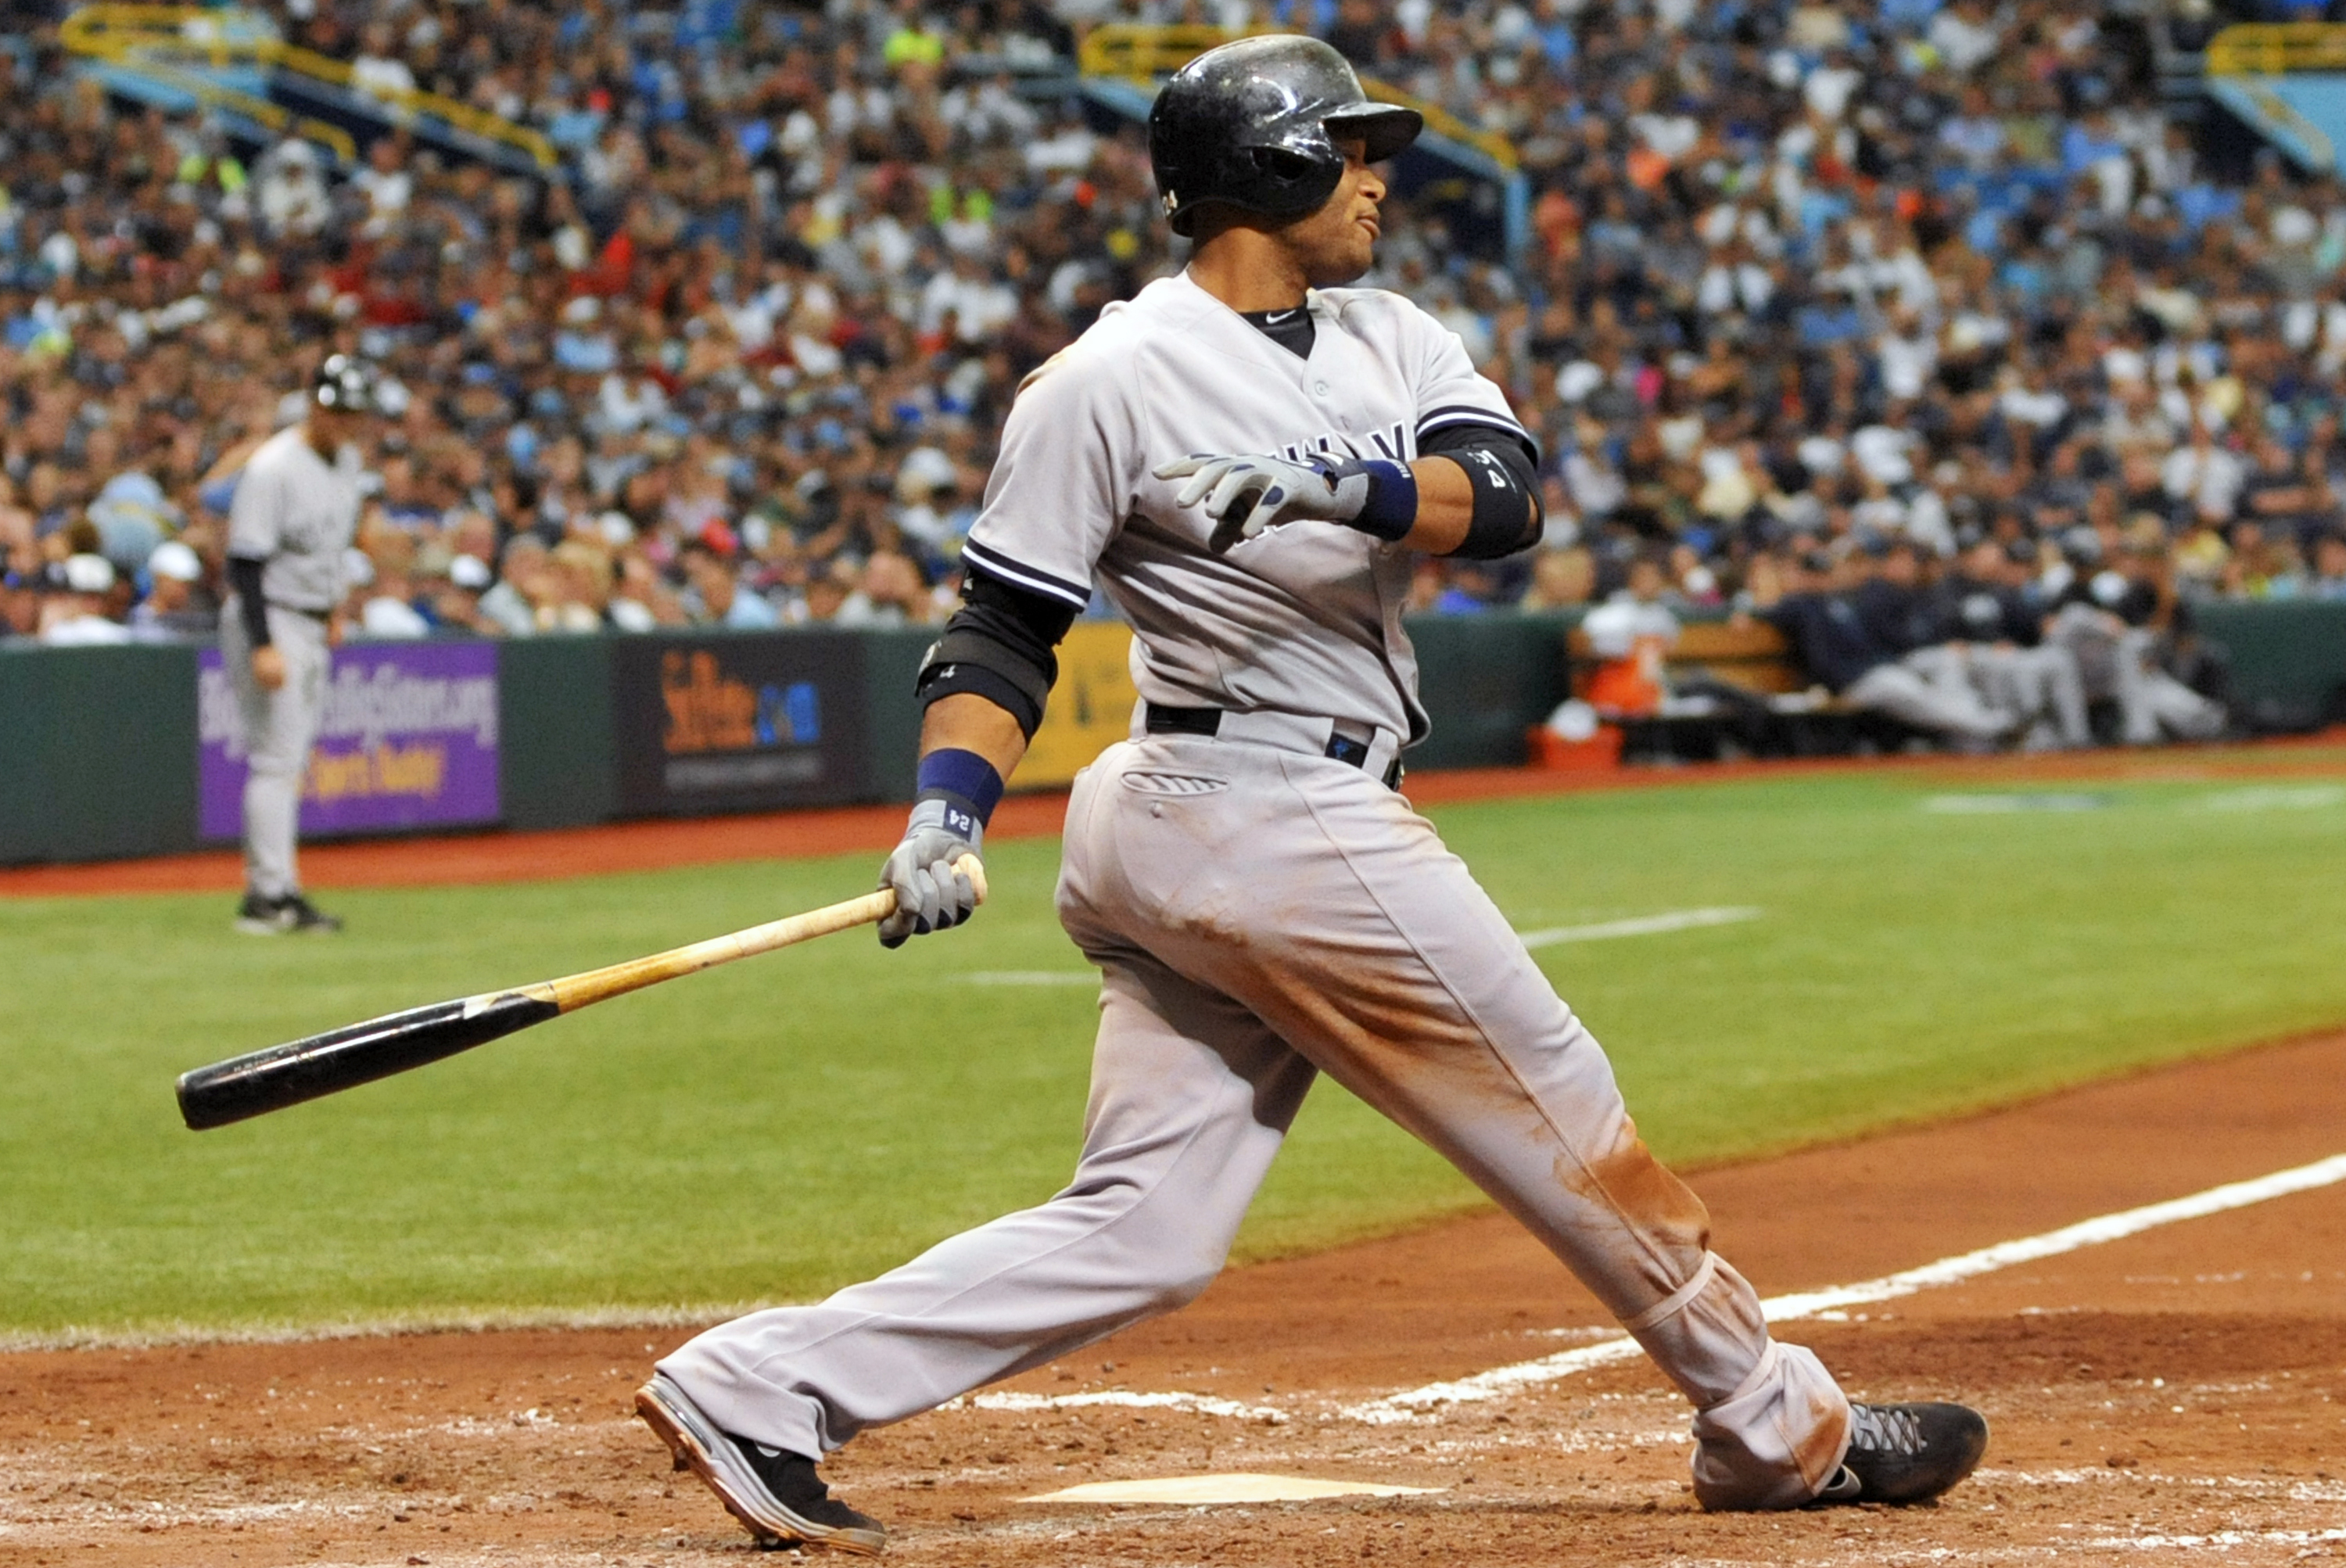 What Should Be New York Yankees' Max Offer to Robinson Cano